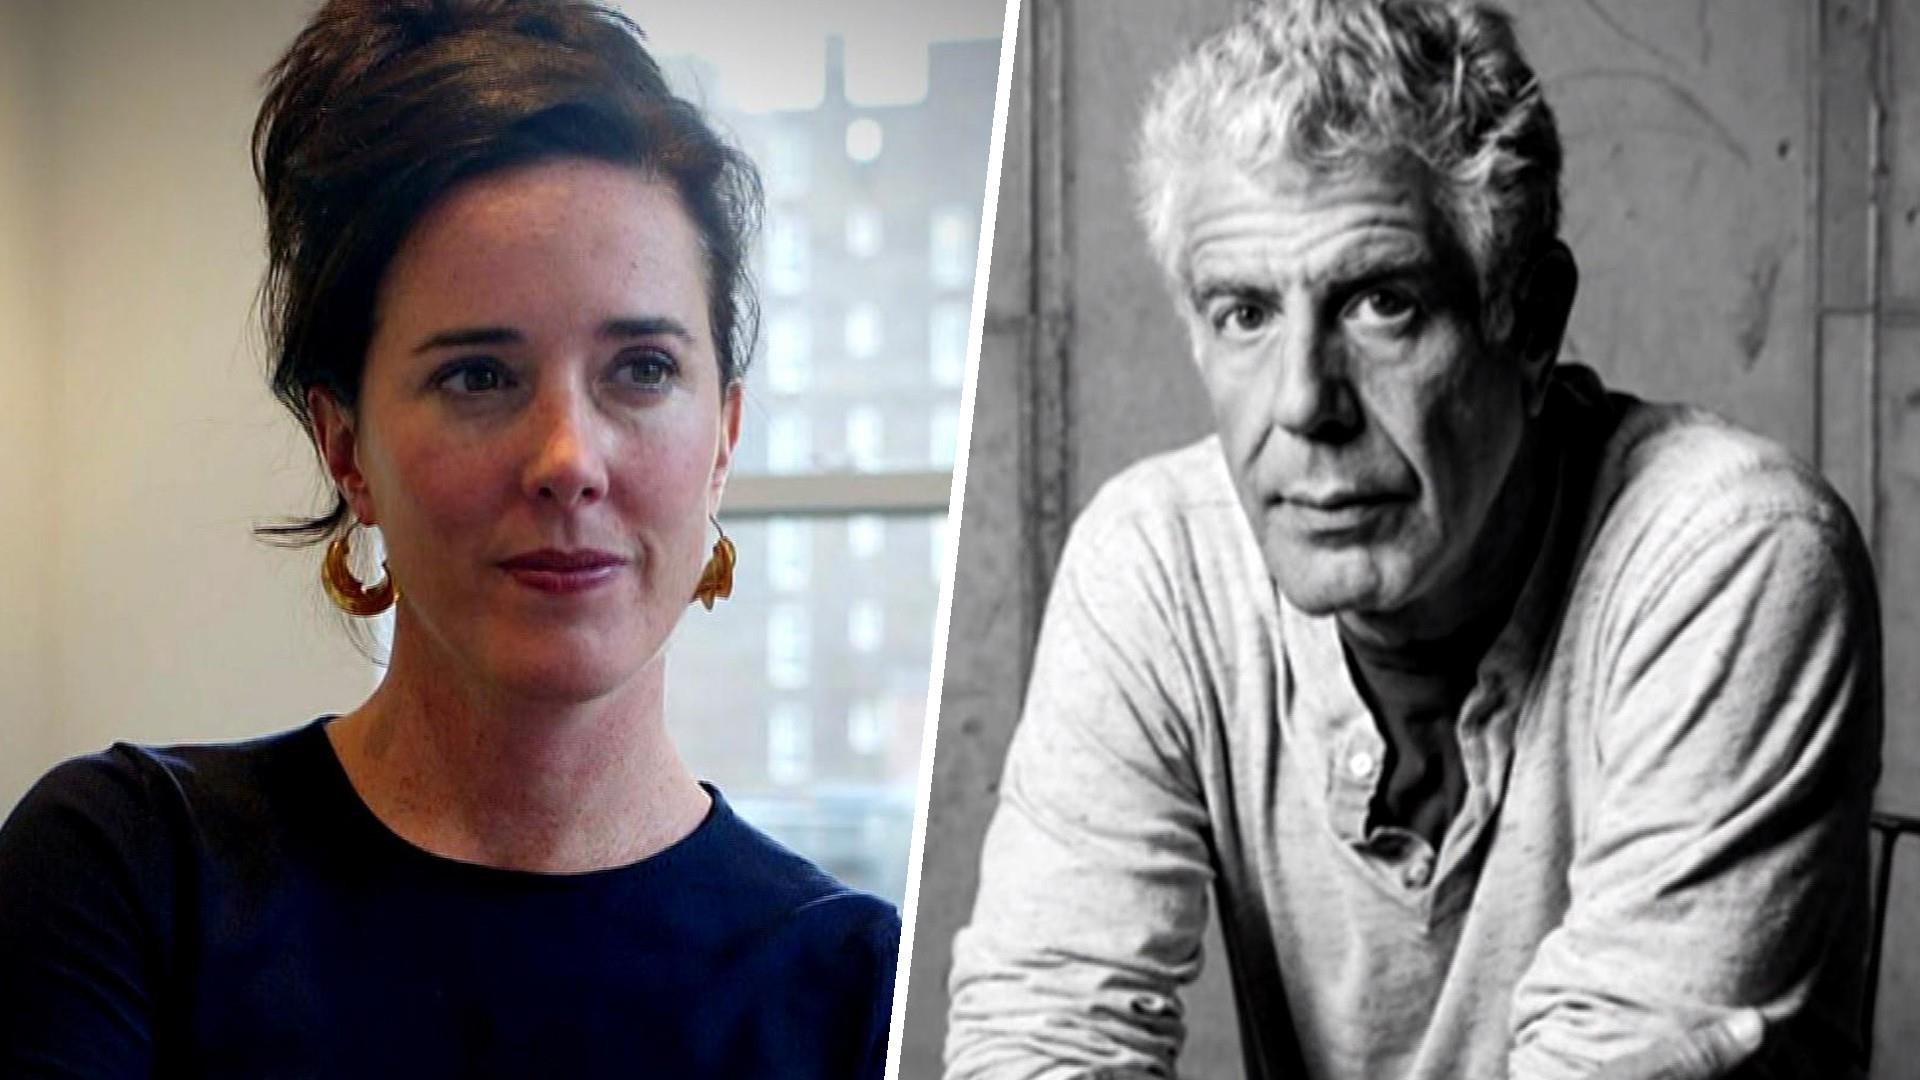 Anthony Bourdain And Kate Spade Have Celebs Sharing About Mental Illness Nbc News